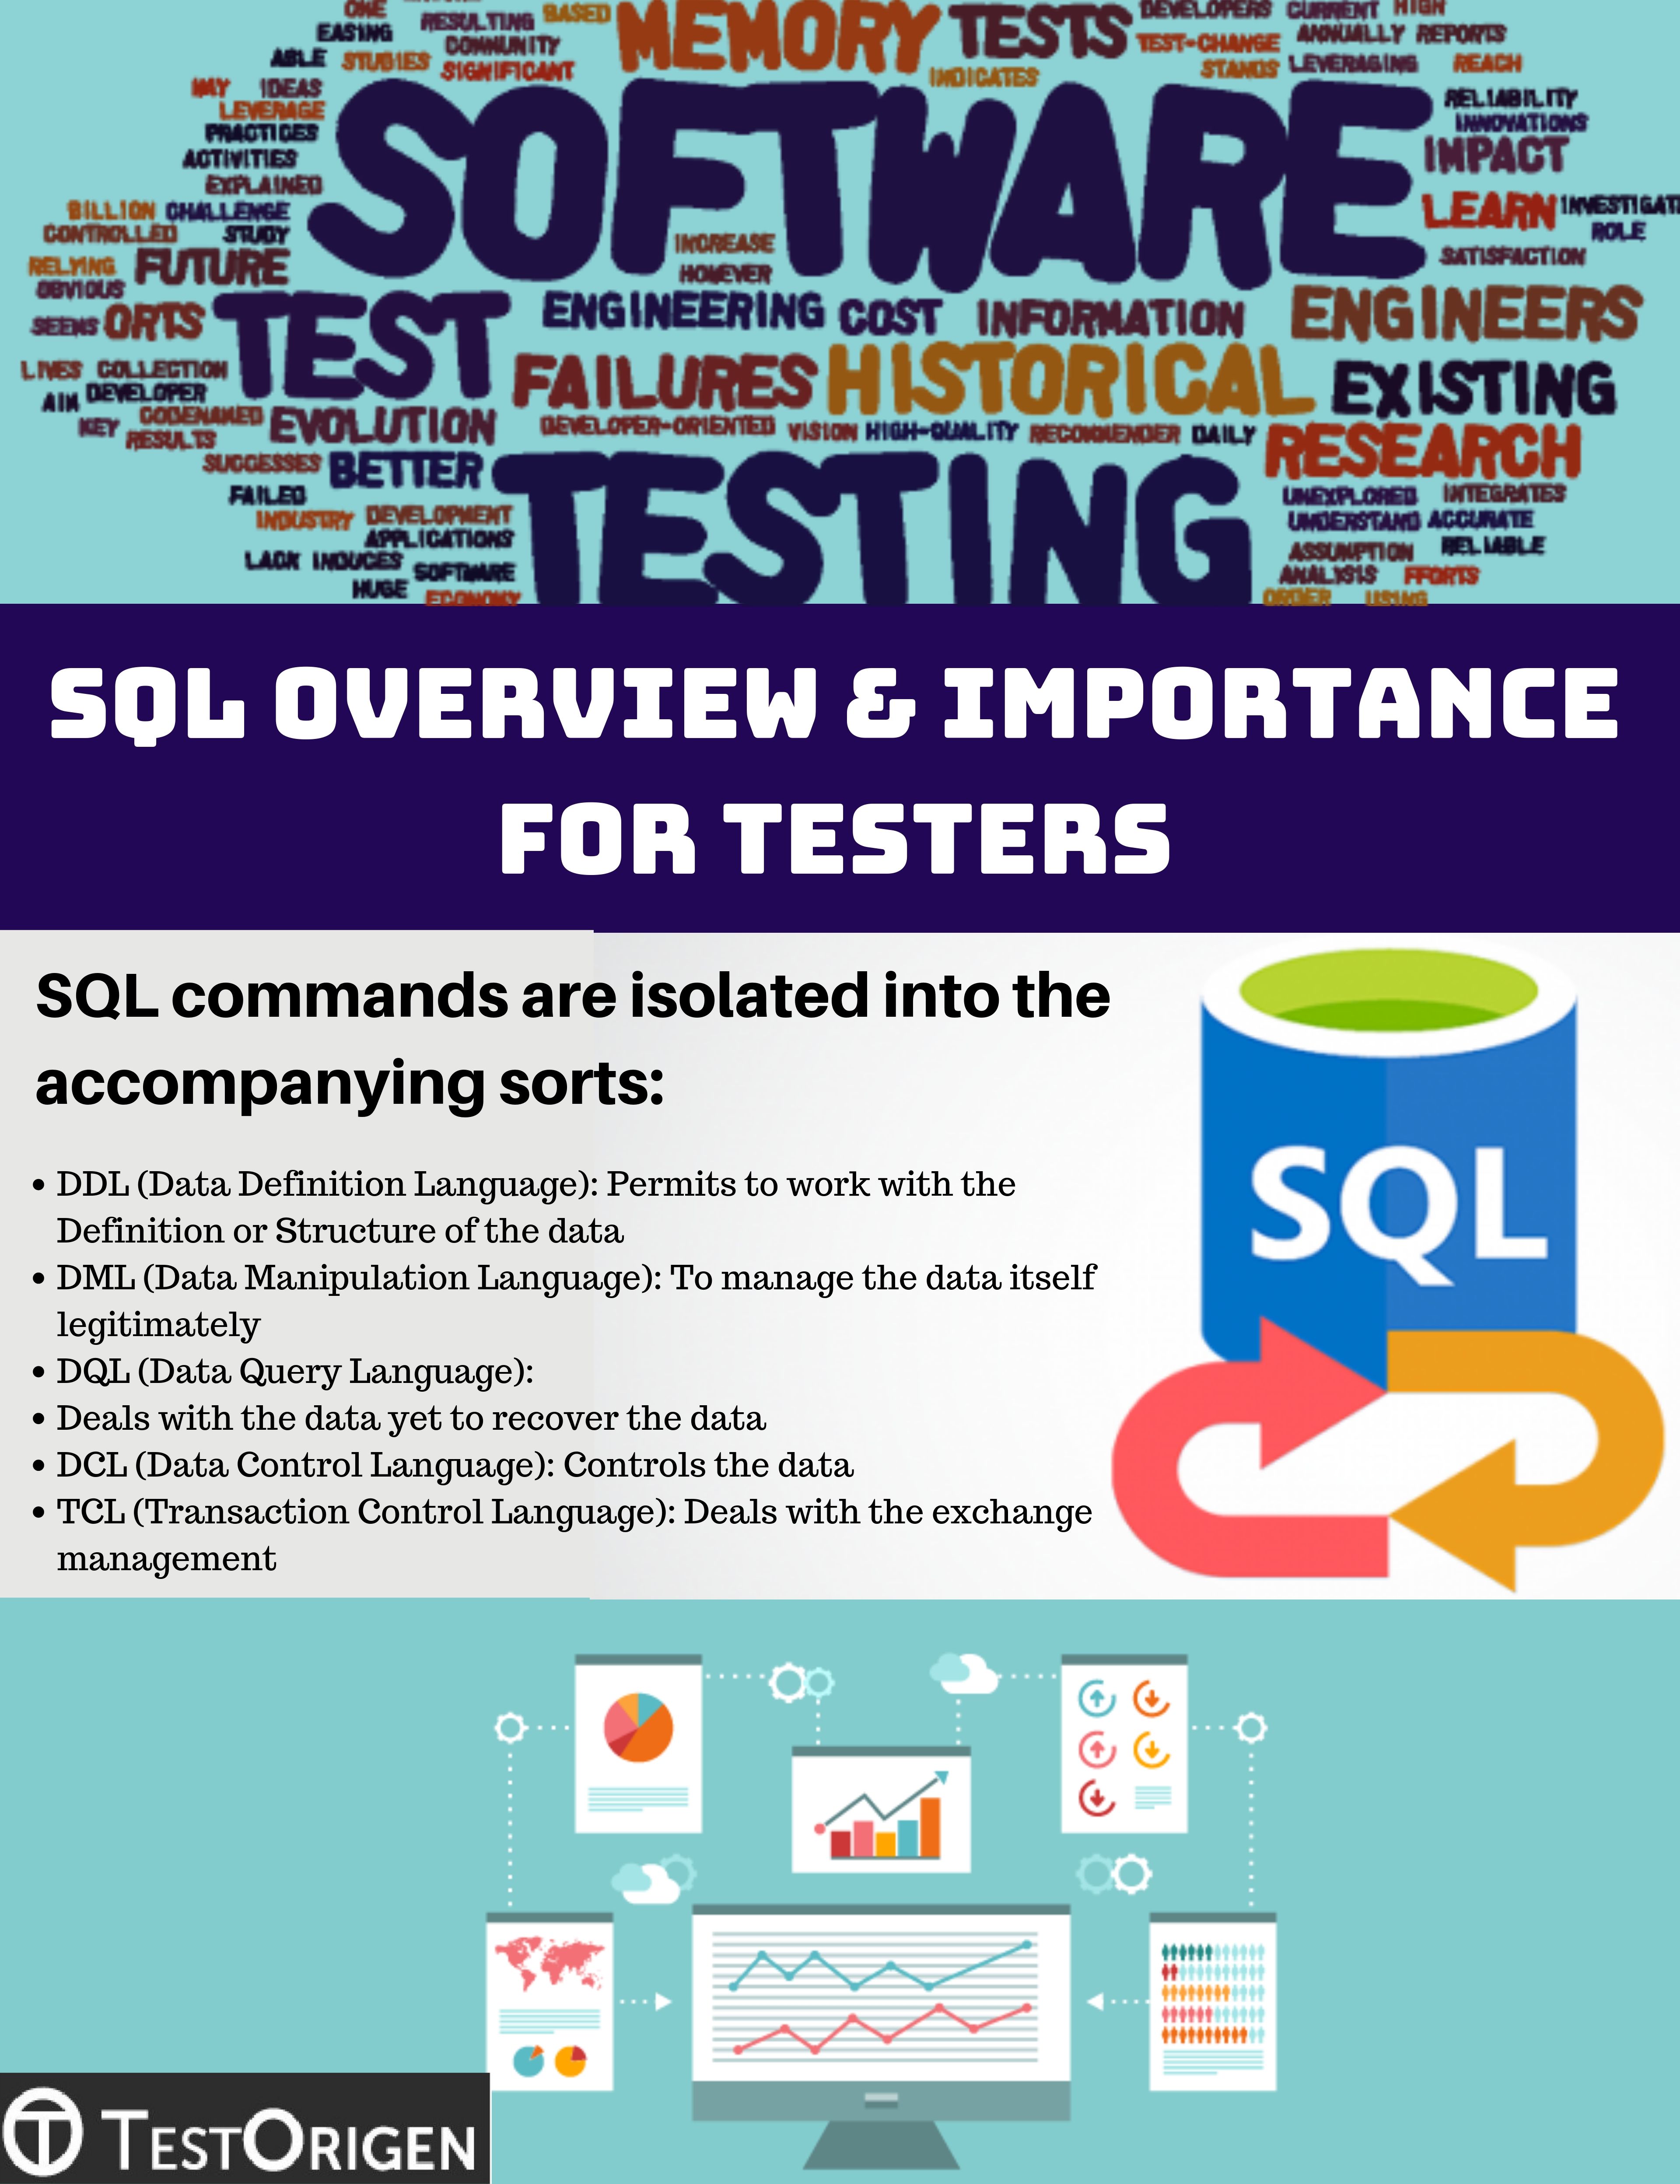 SQL Overview & Importance for Testers